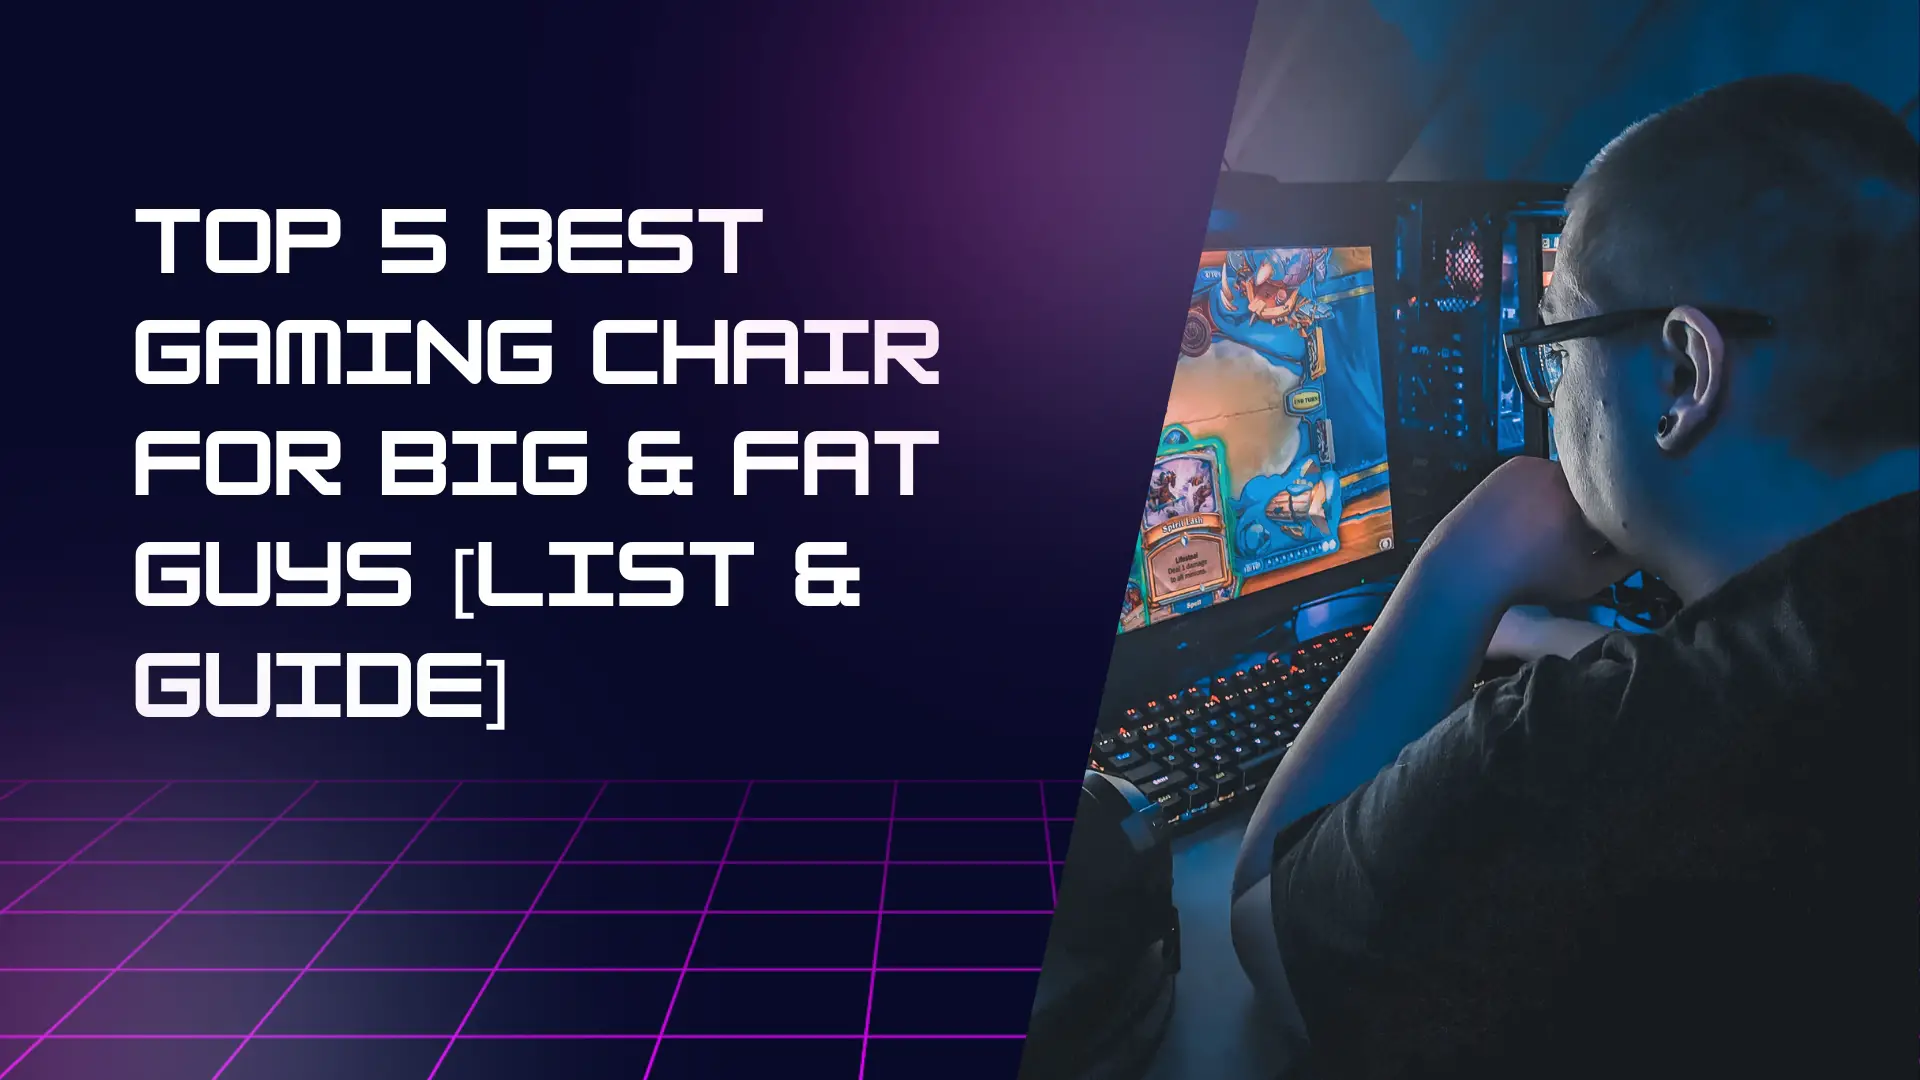 Top 5 Best Gaming Chair for Big & Fat Guys [List & Guide]